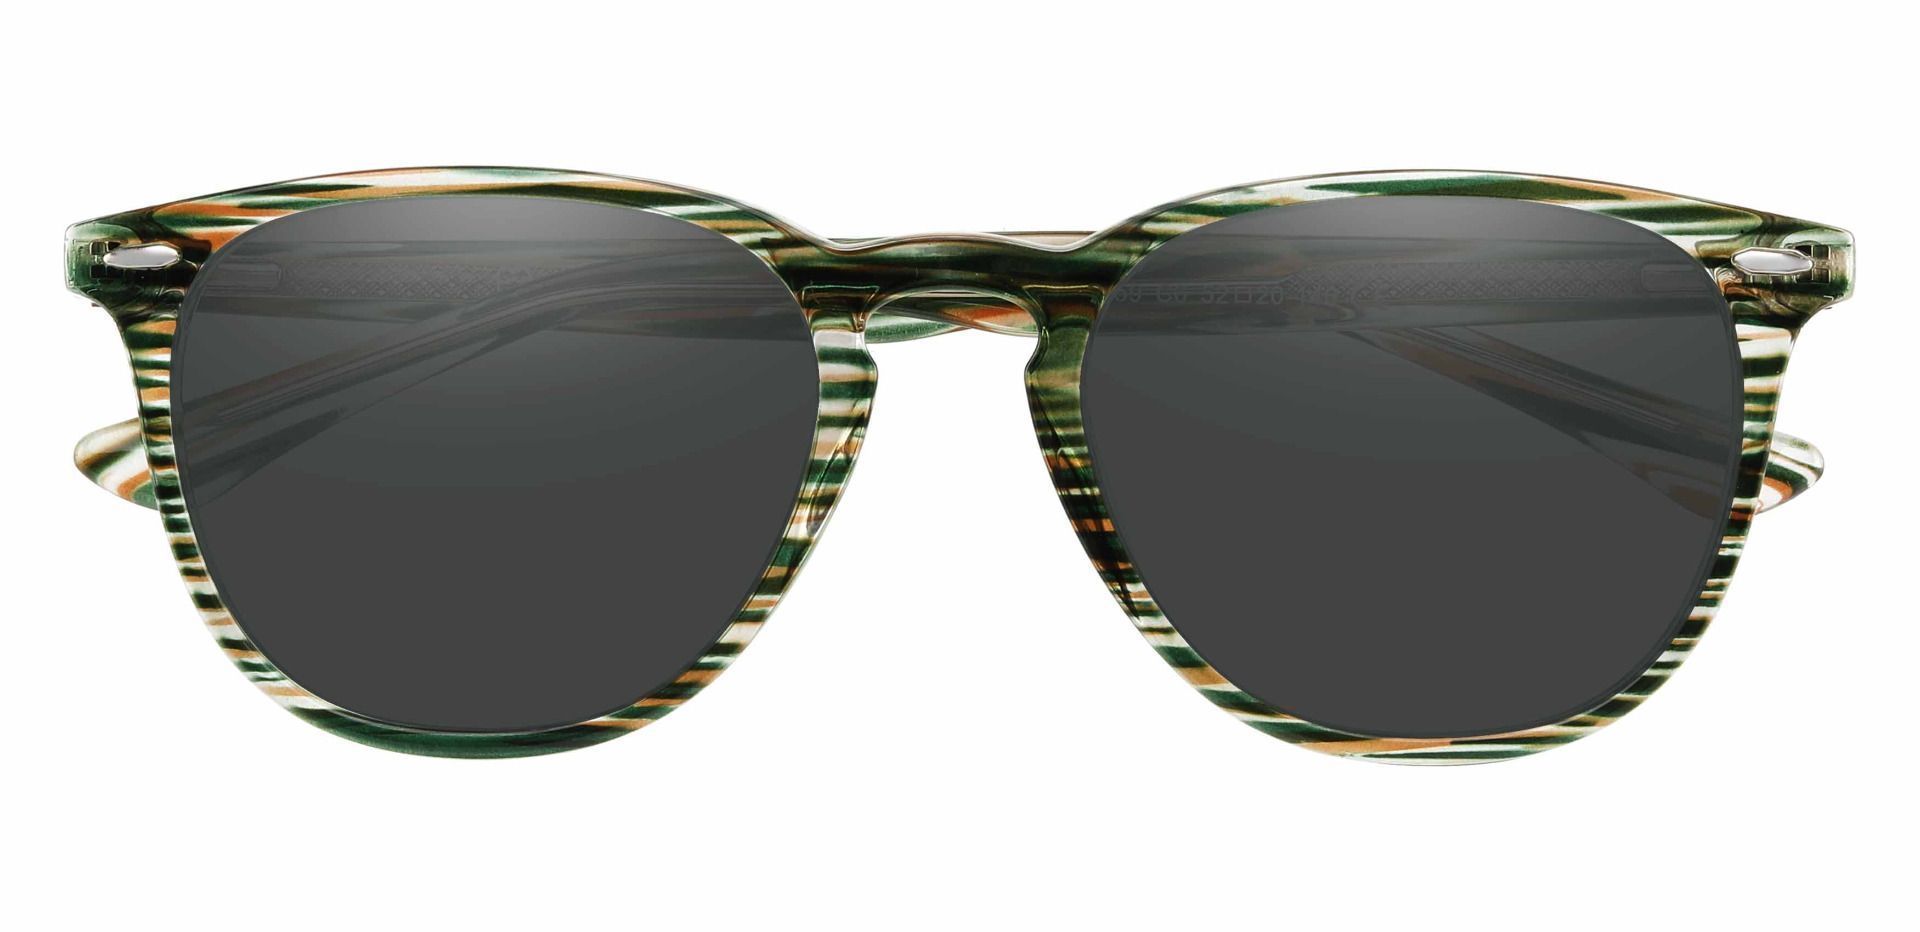 Sycamore Oval Lined Bifocal Sunglasses - Green Frame With Gray Lenses